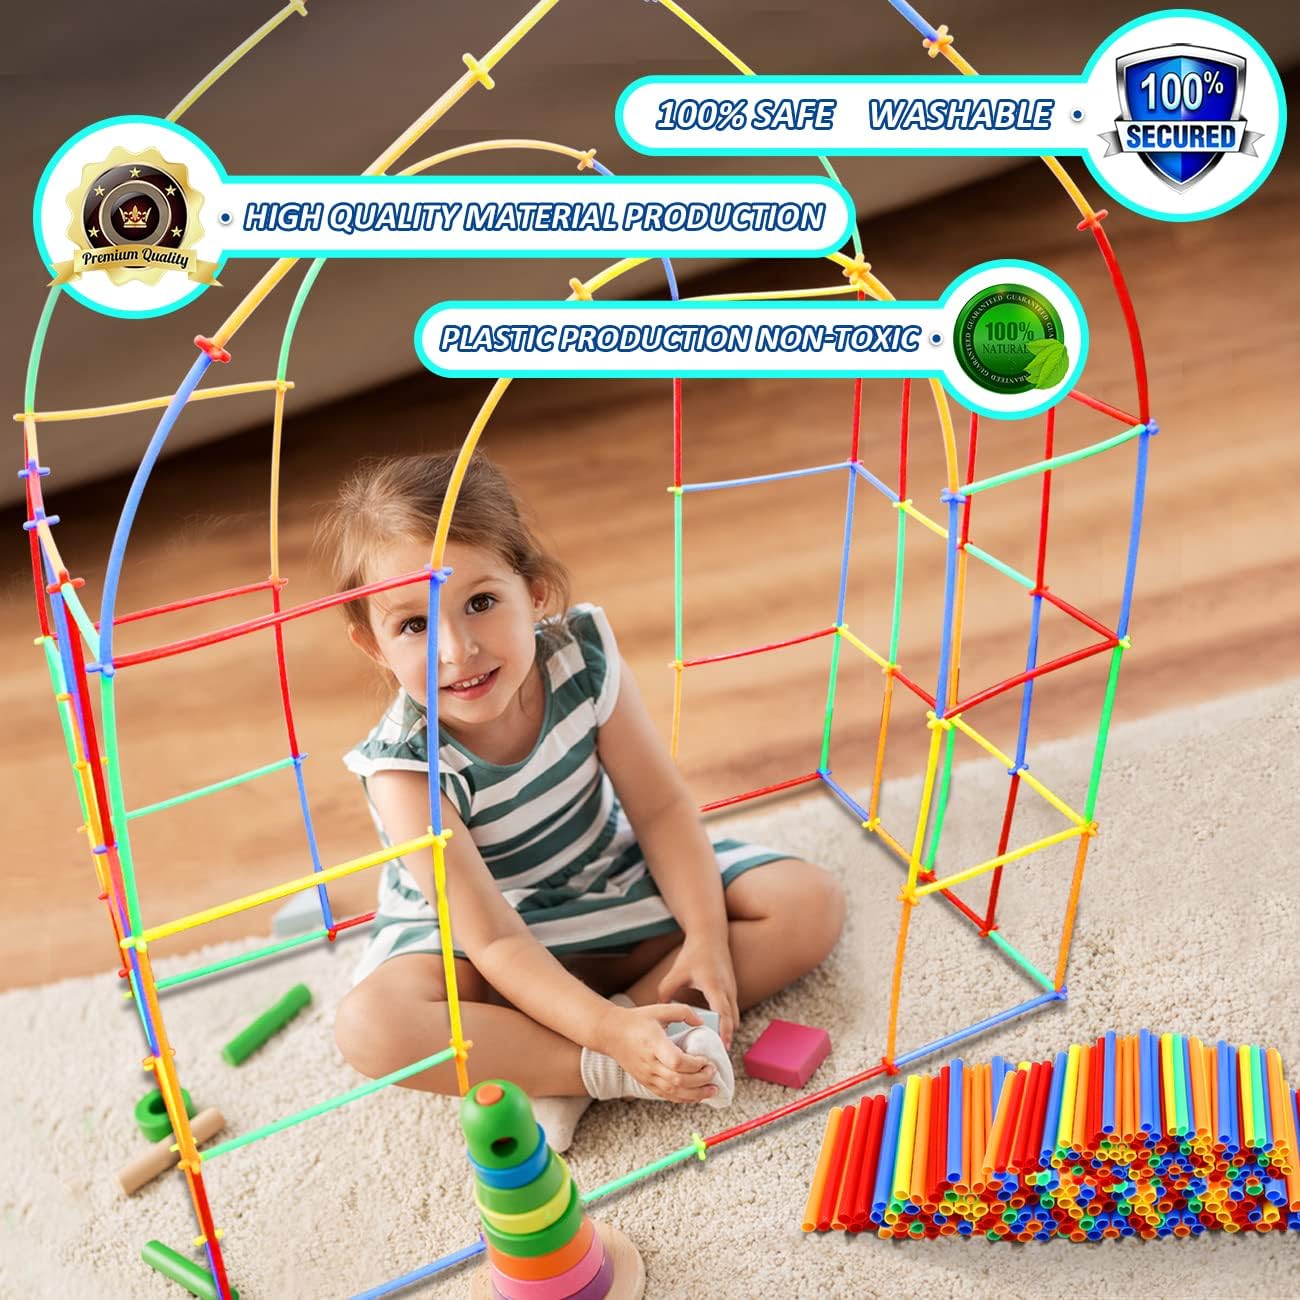 Straw Constructor Toys STEM Building Toys 600Pcs Straw Toy Interlocking Plastic Toys Engineering Toys Thin Tube Blocks Toy Educational Toy Kit for 3 4 5 6 7years Kids Toy for Boys and Girls Gift